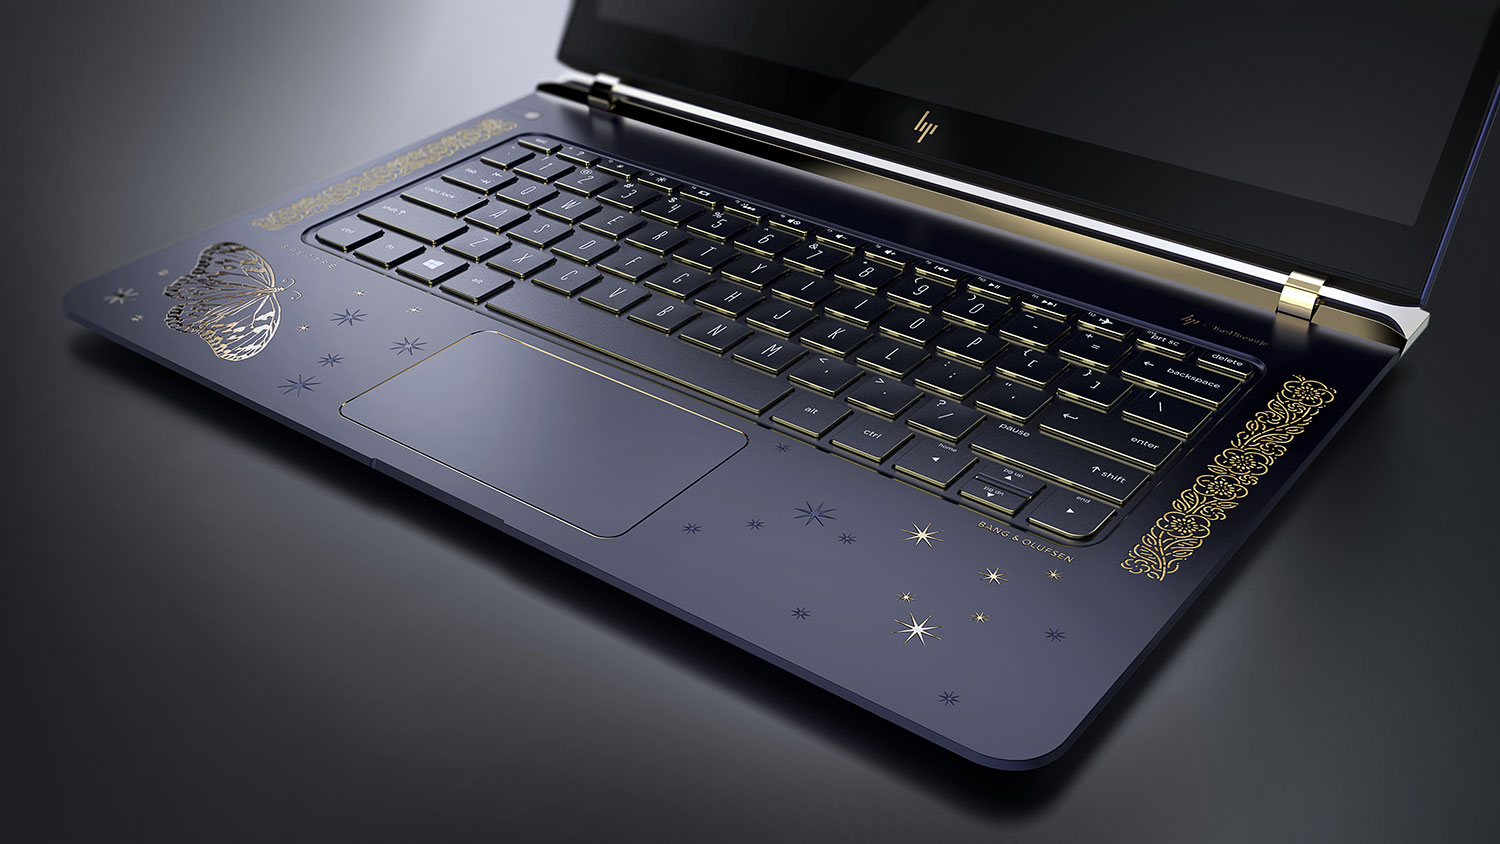 hp spectre laptop special edition tord boontje 2